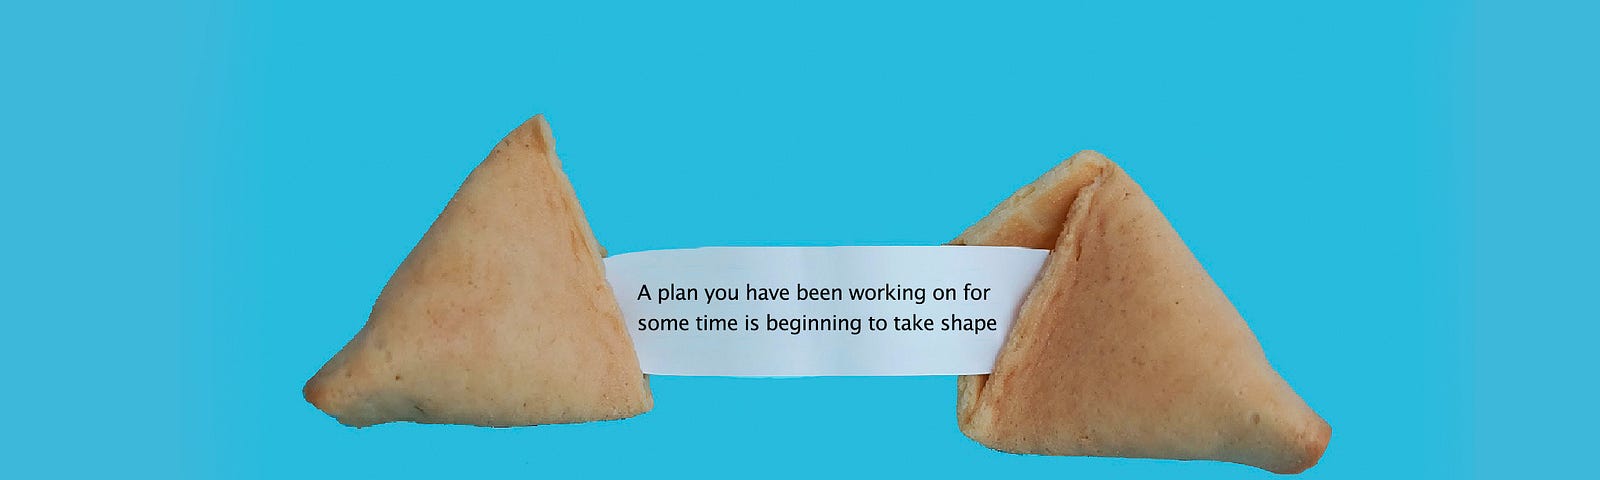 A fortune cookie saying “A plan you have been working on is beginning to take shape” Img credit: Elena Koycheva — Unsplash